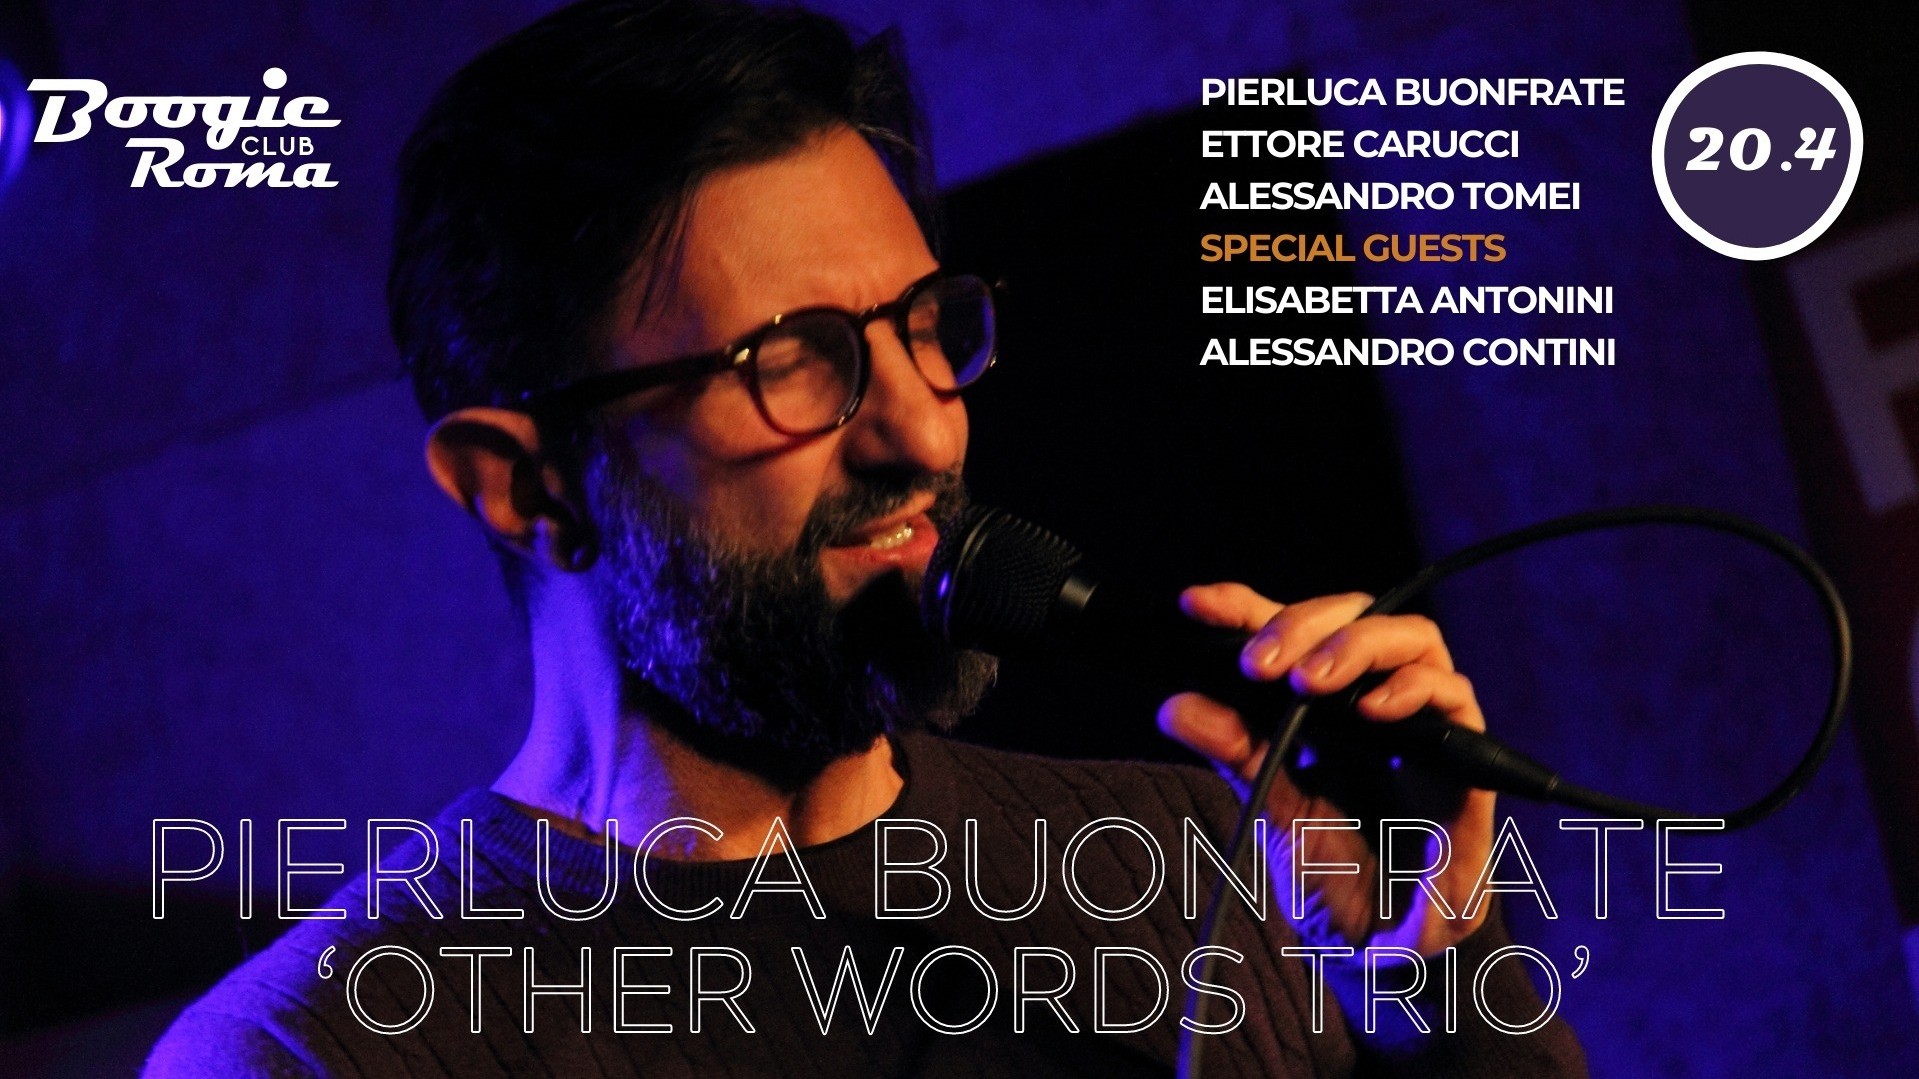 Pierluca Buonfrate ‘Other words trio’